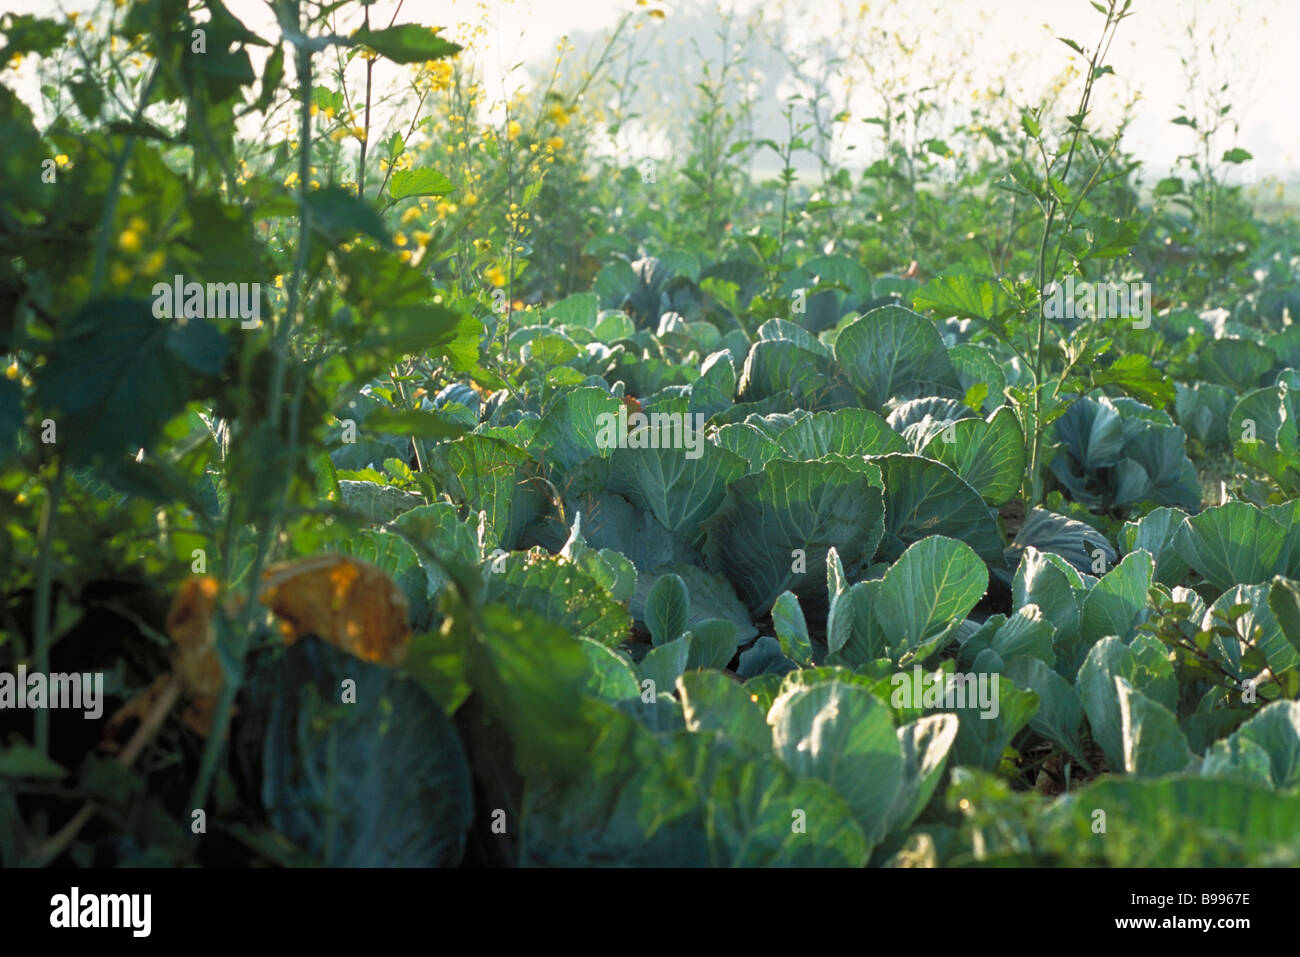 Cabbage growing in field Stock Photo